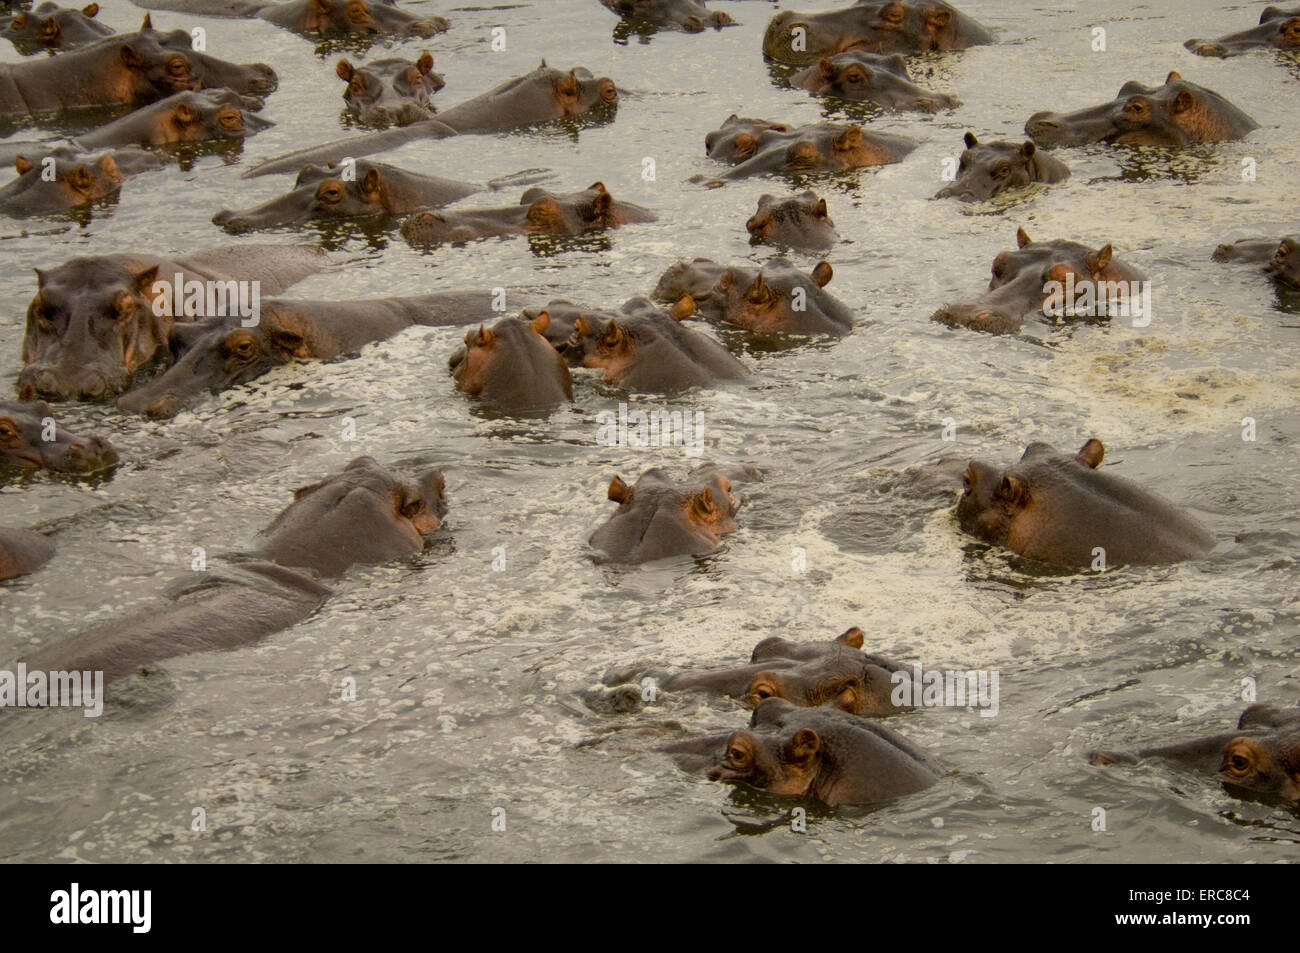 A POD OF HIPPOS IN WATER Stock Photo